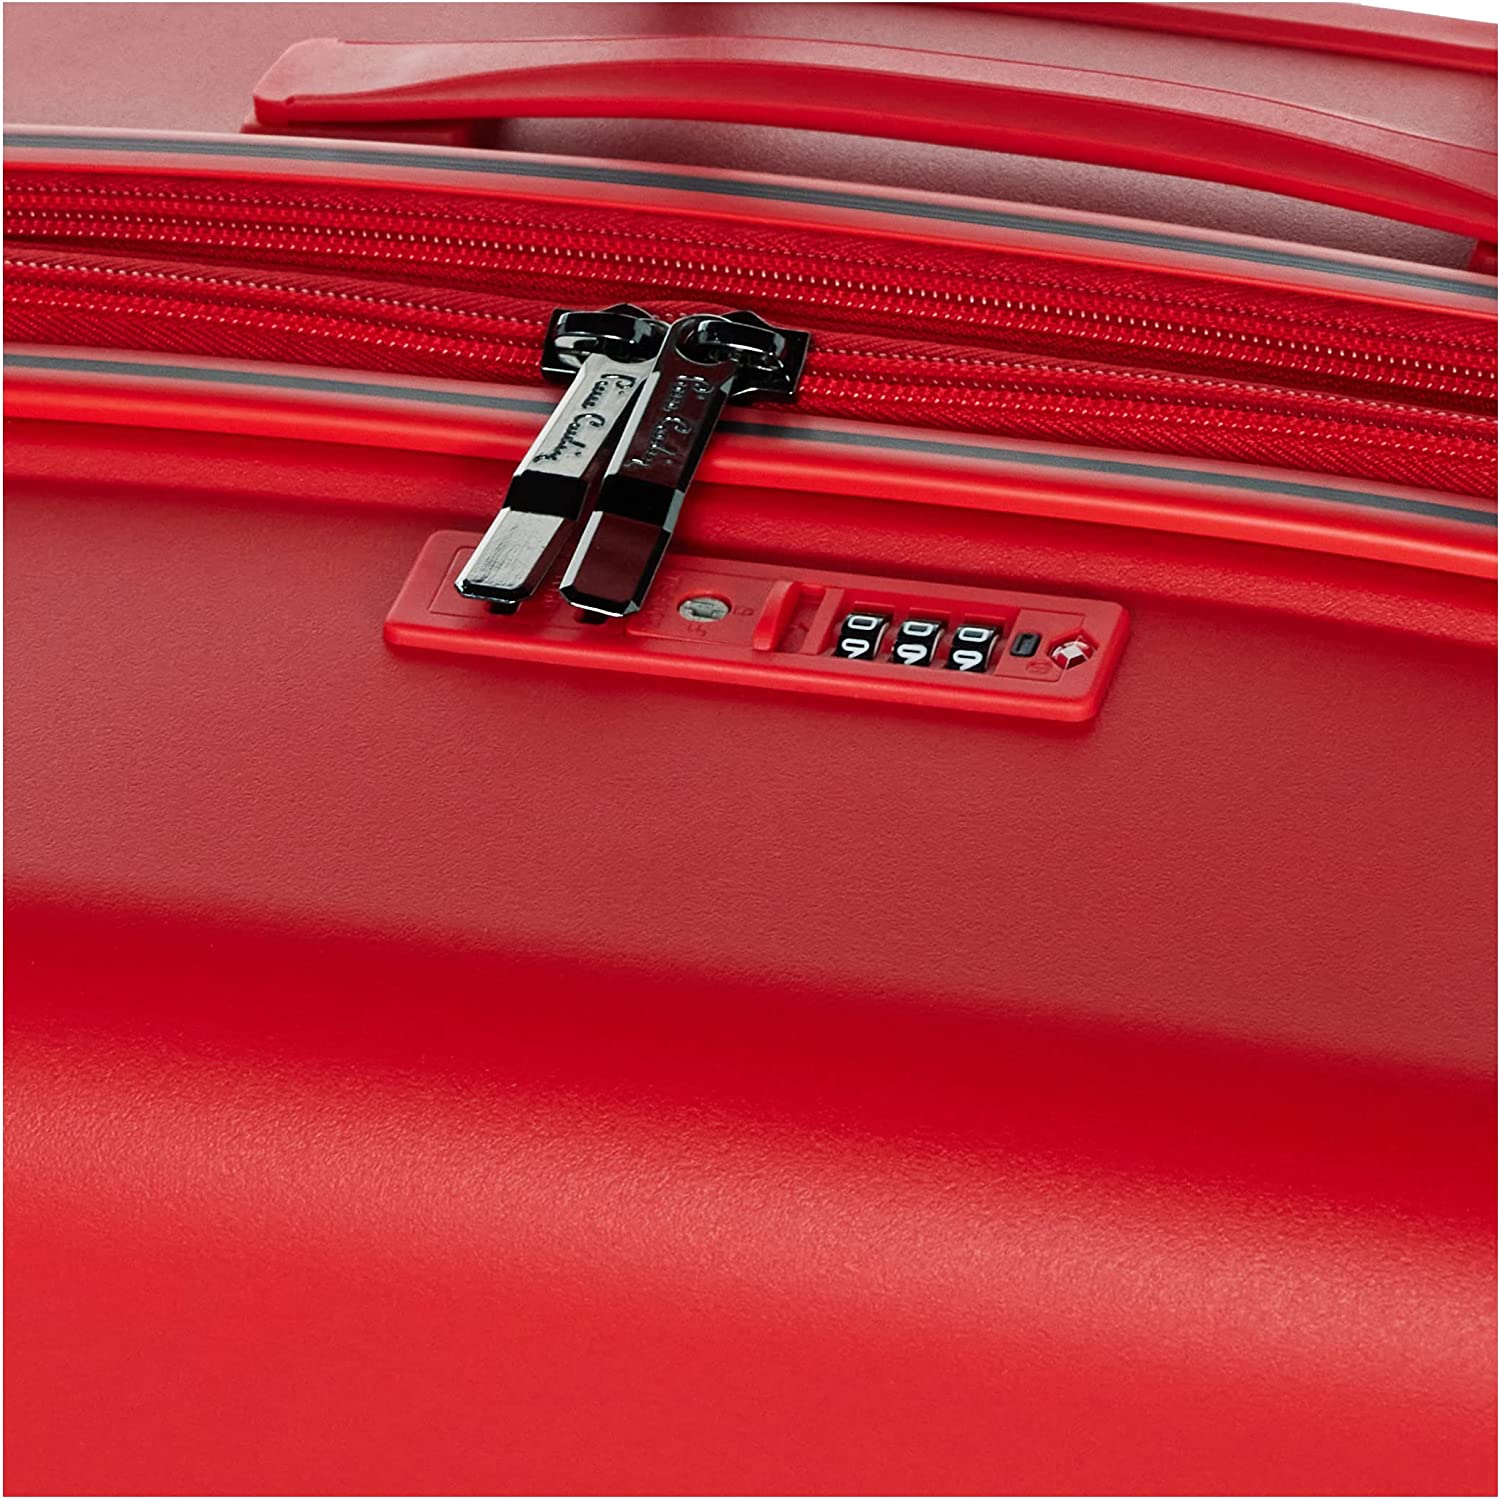 Pierre Cardin Zurich Collection Carry On - Red